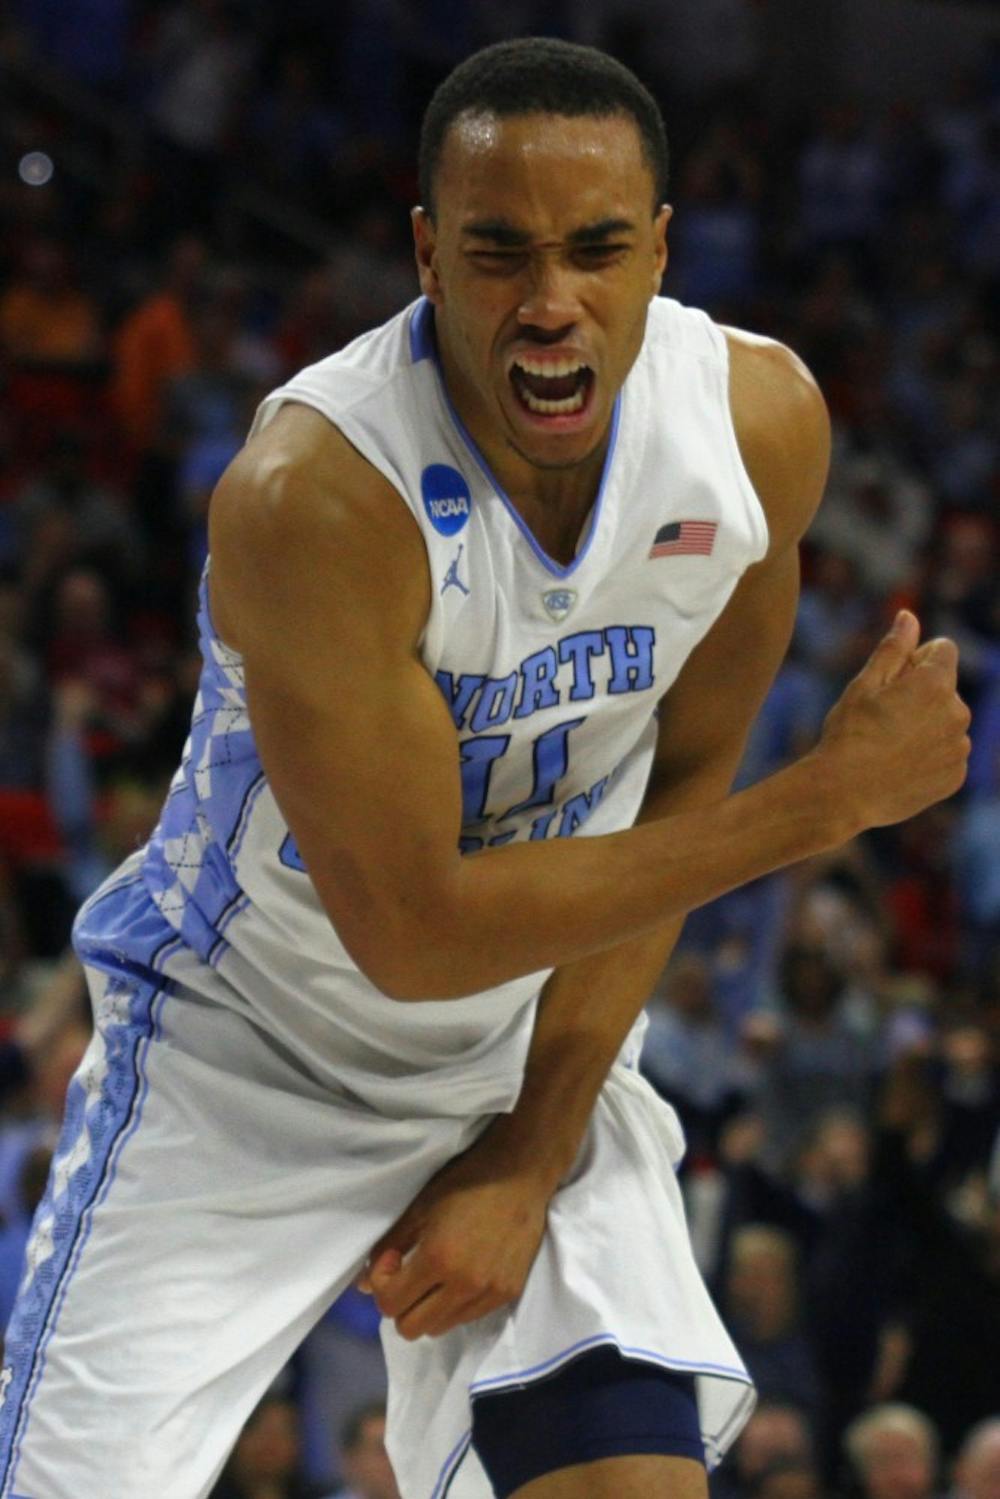 Senior Brice Johnson reacts after scoring during the second half.